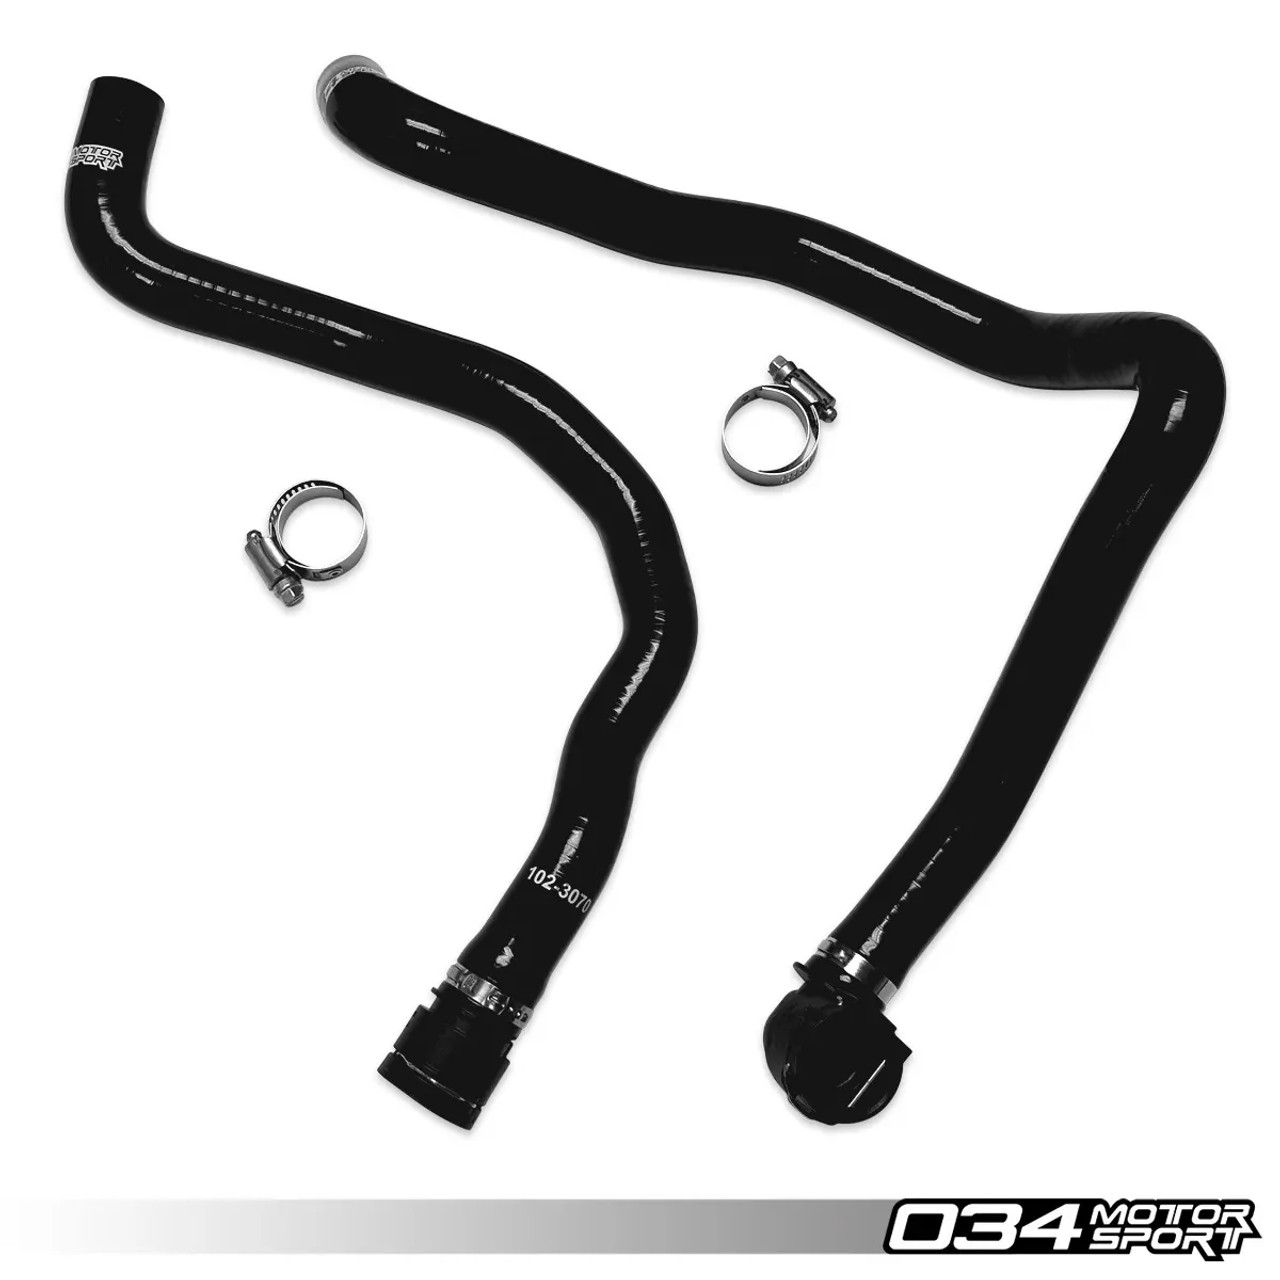 034Motorsport Silicone Heater Core Hose Set for B5 S4